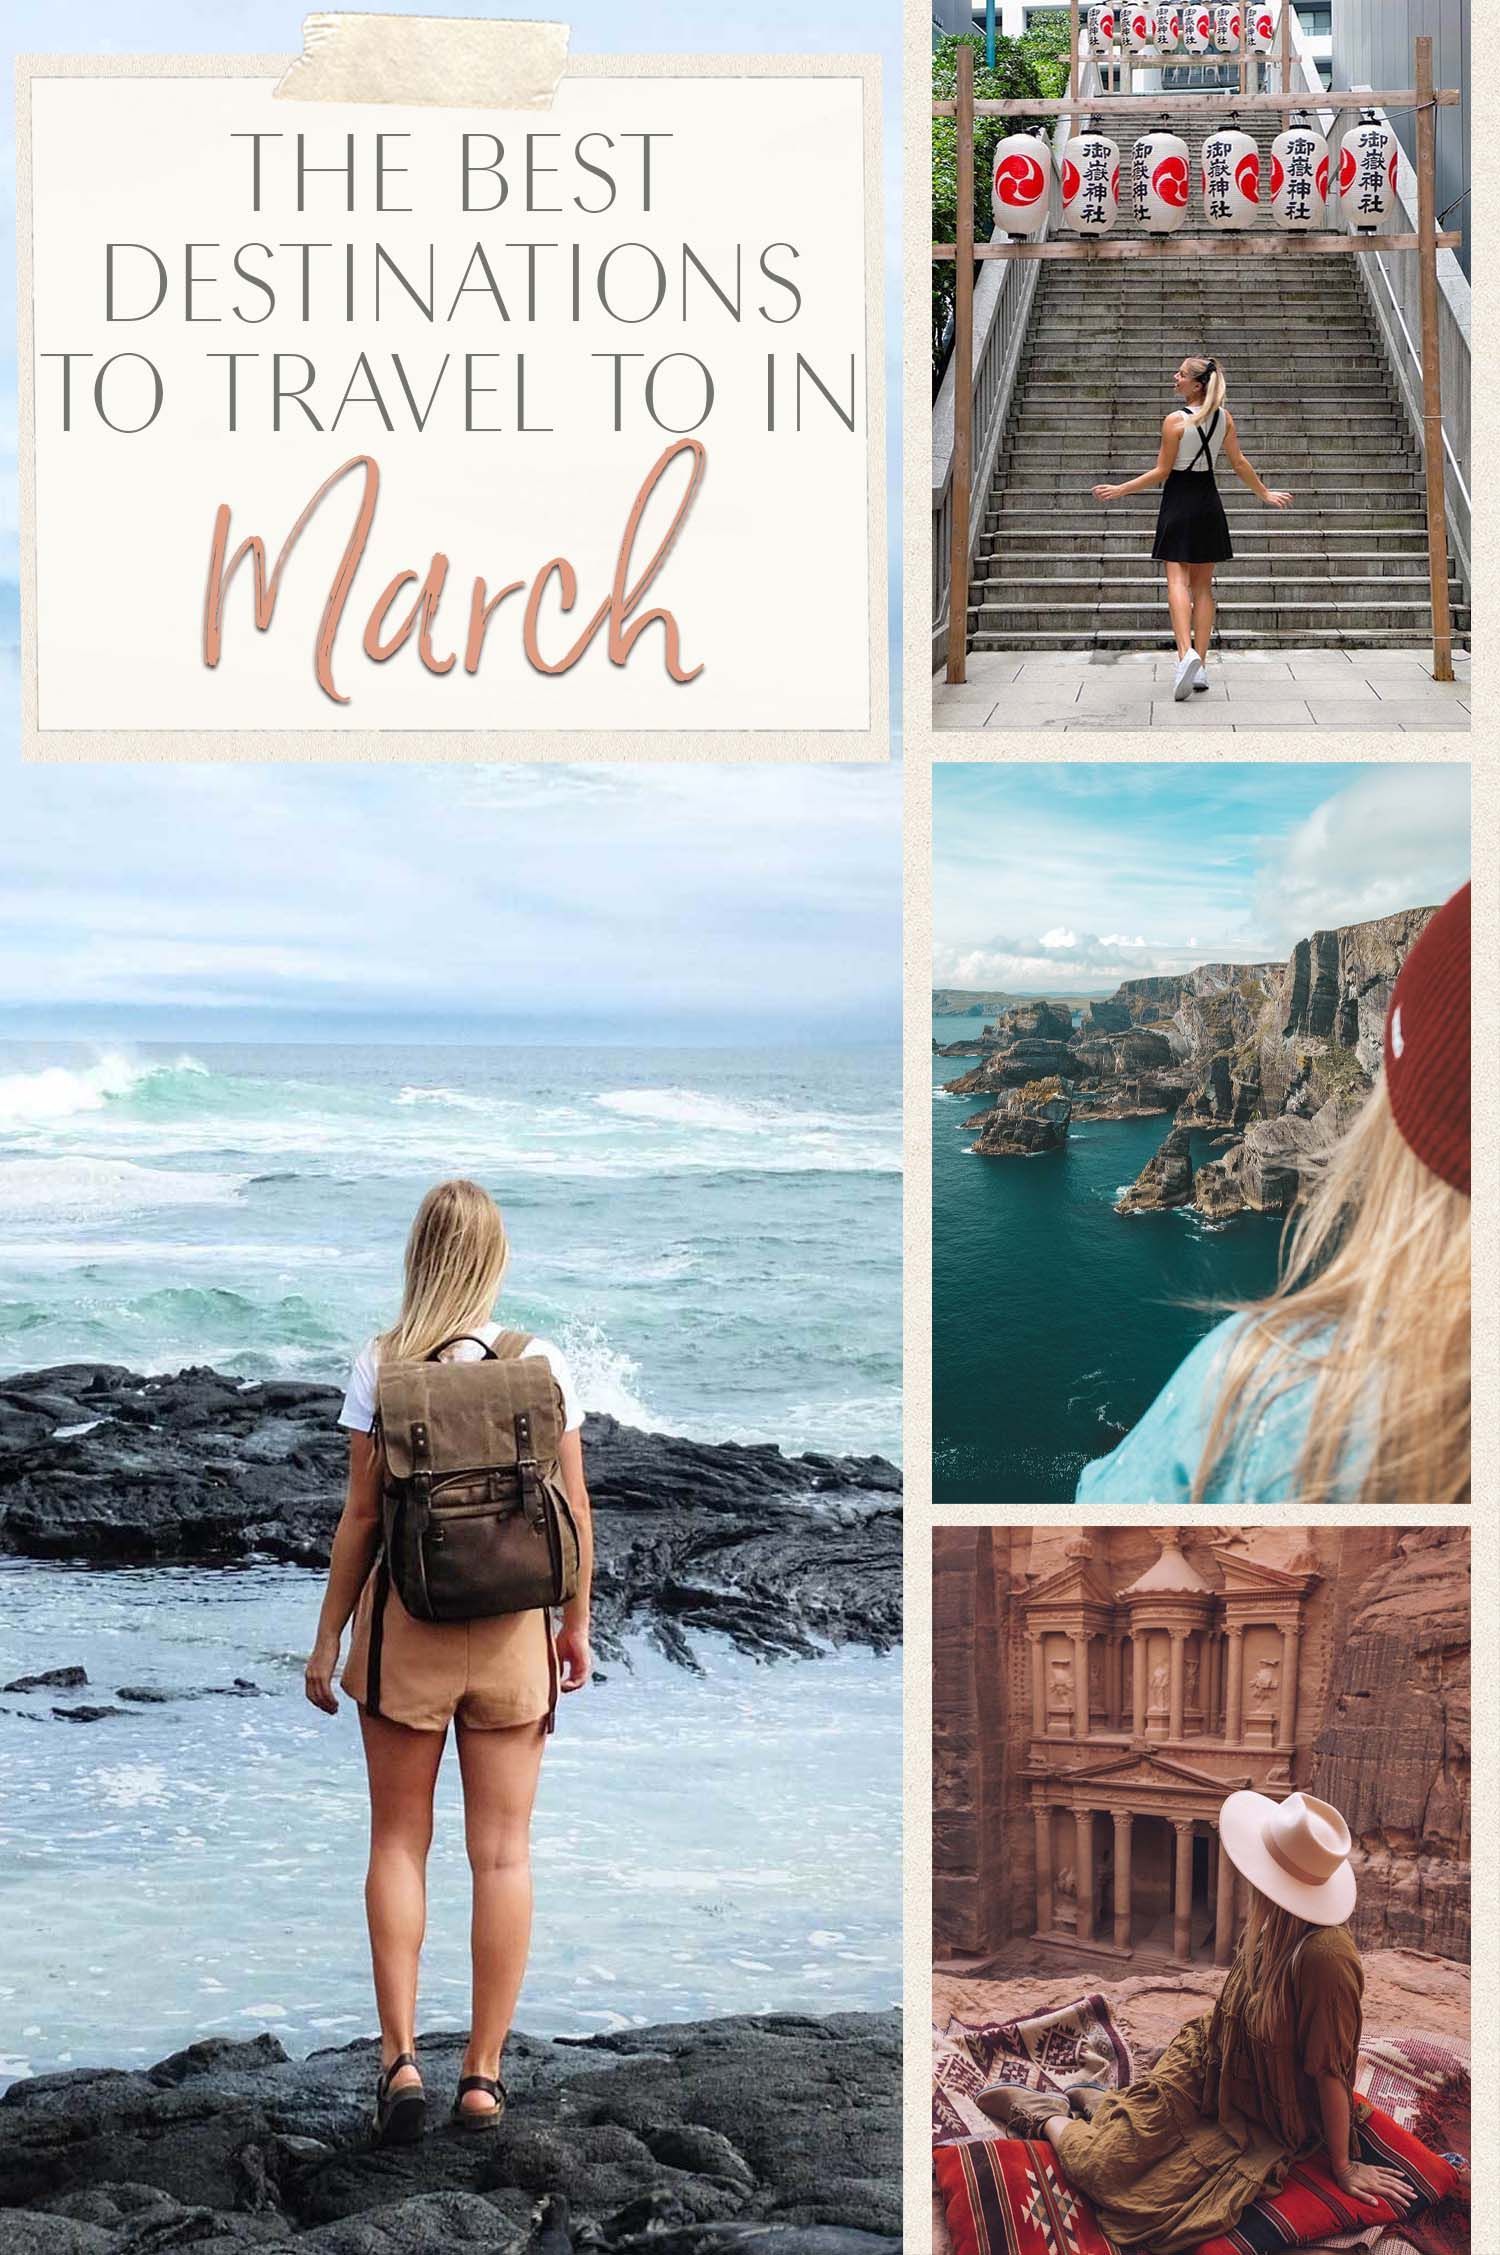 17 holiday Destinations march ideas